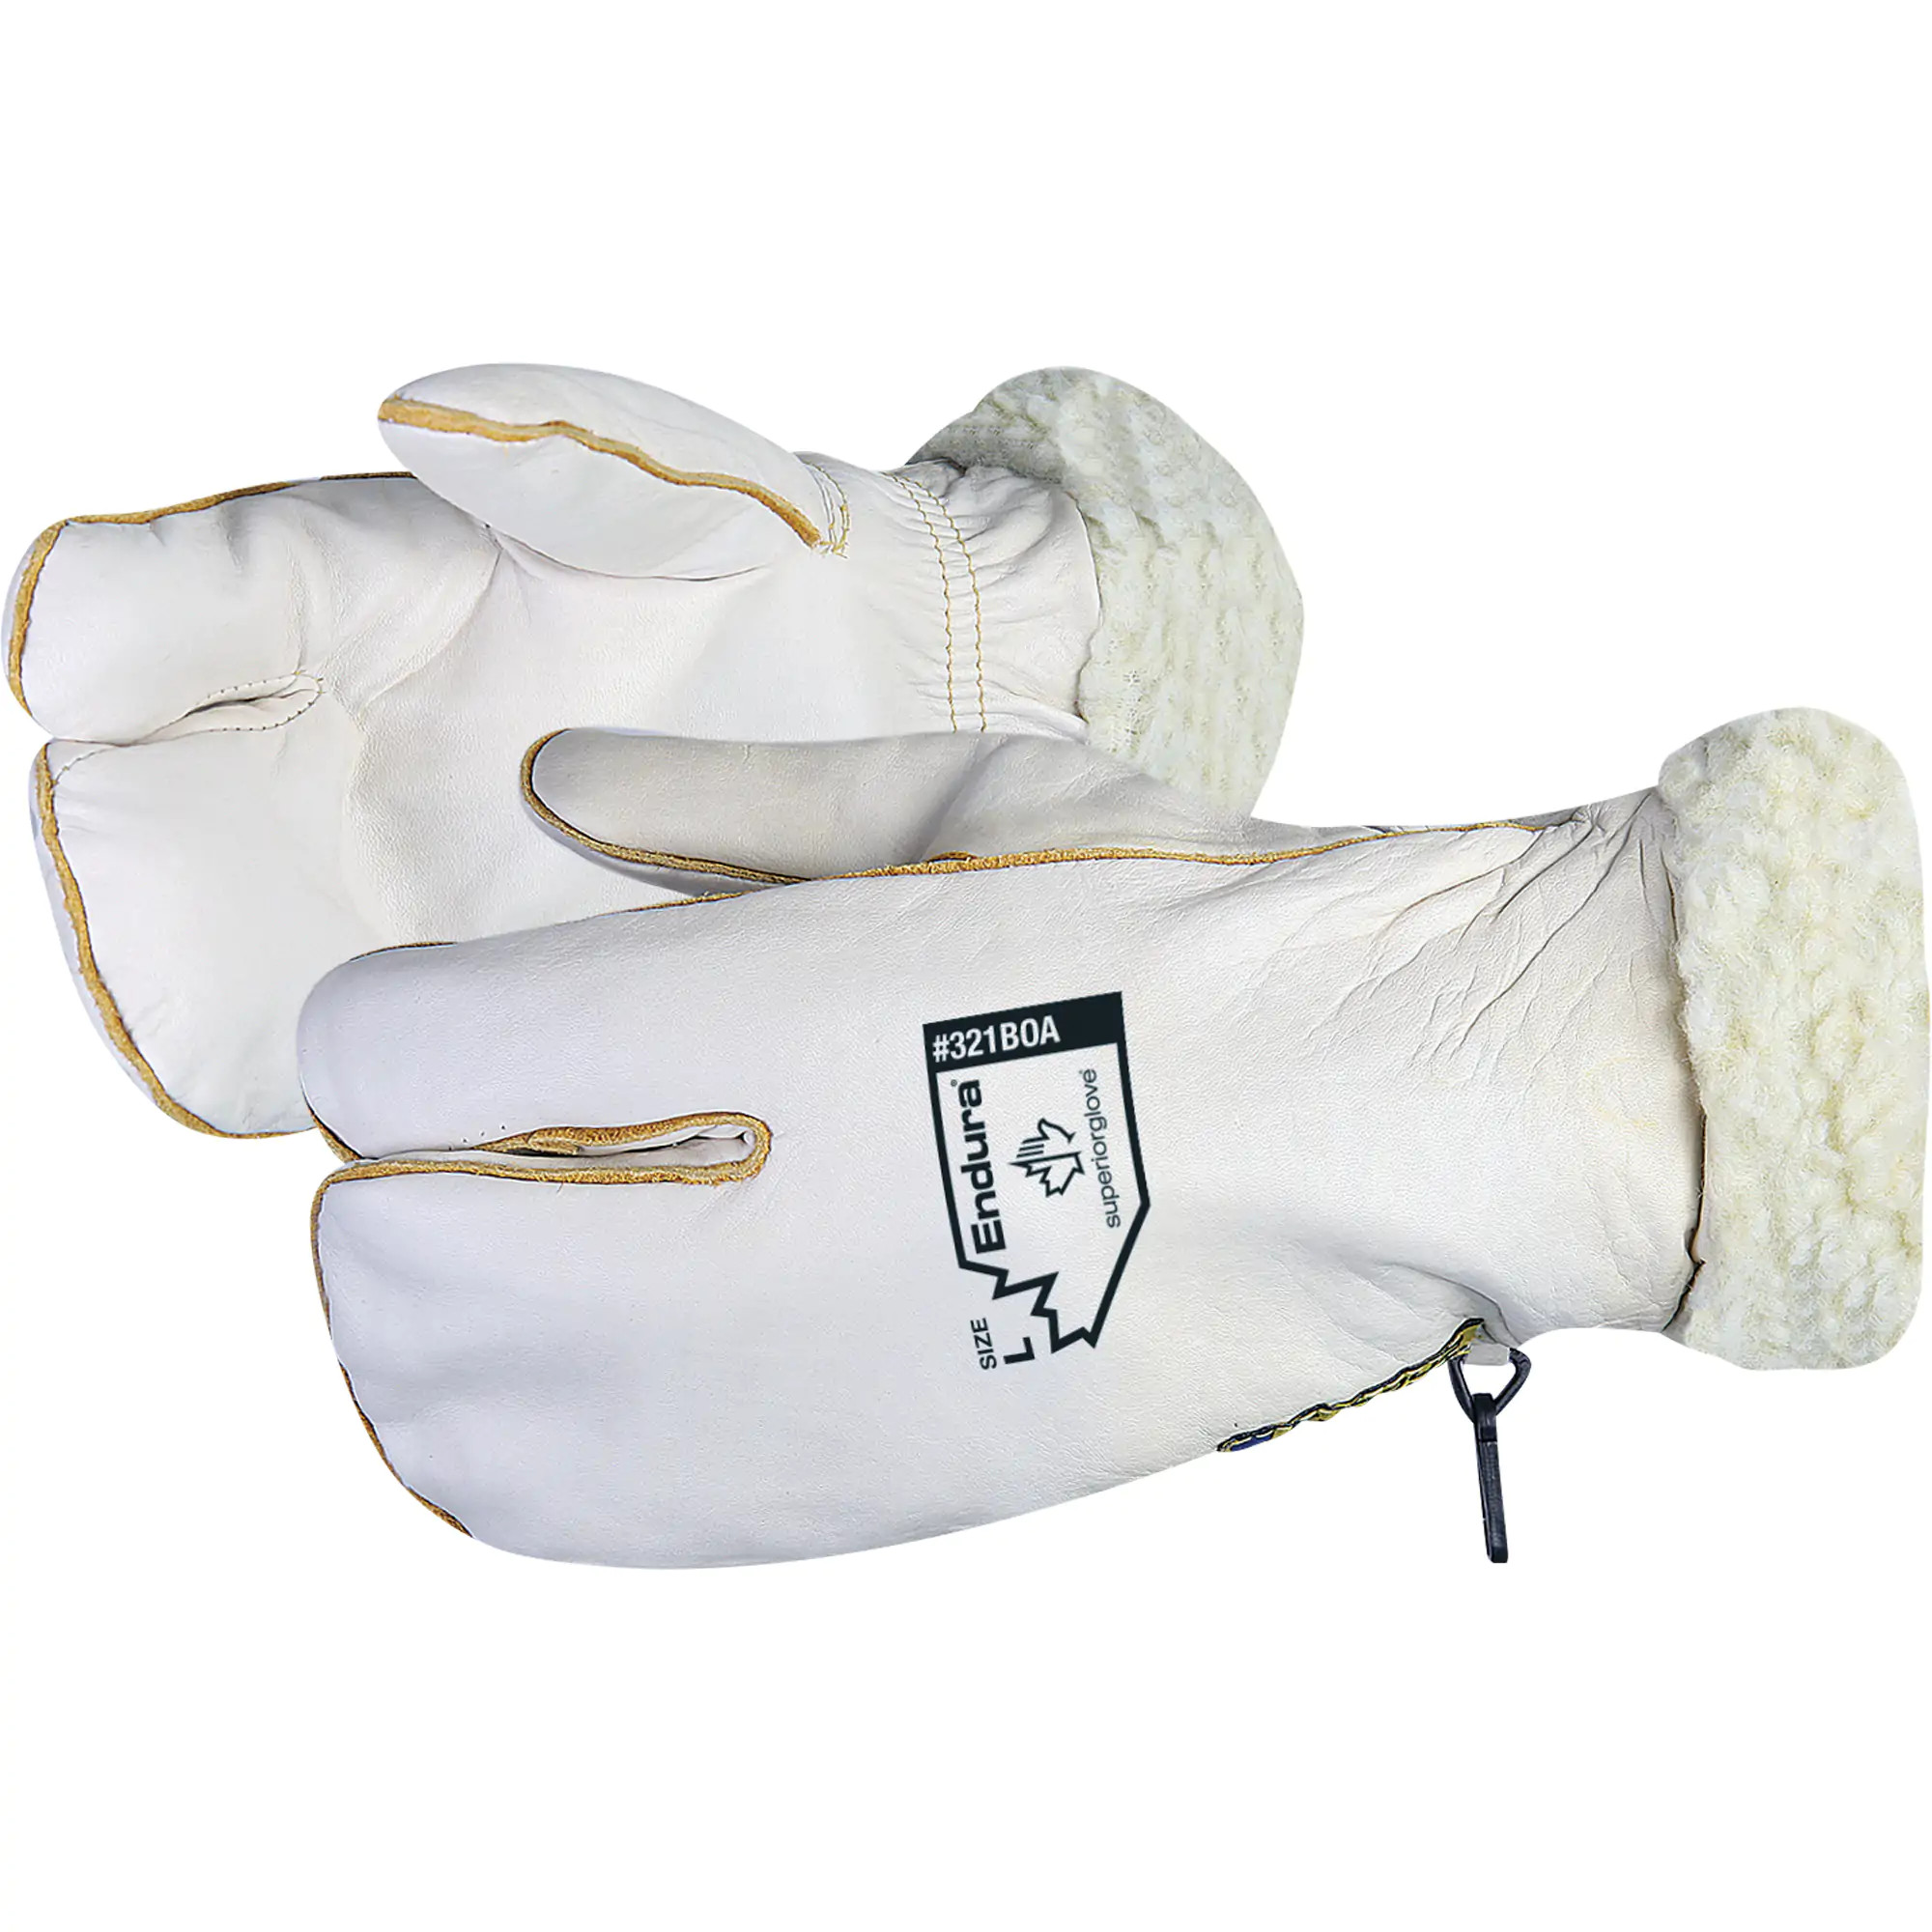 READY STOCK** PROGUARD MAX GRIP GLOVES DG1-000 - ONE PAIR